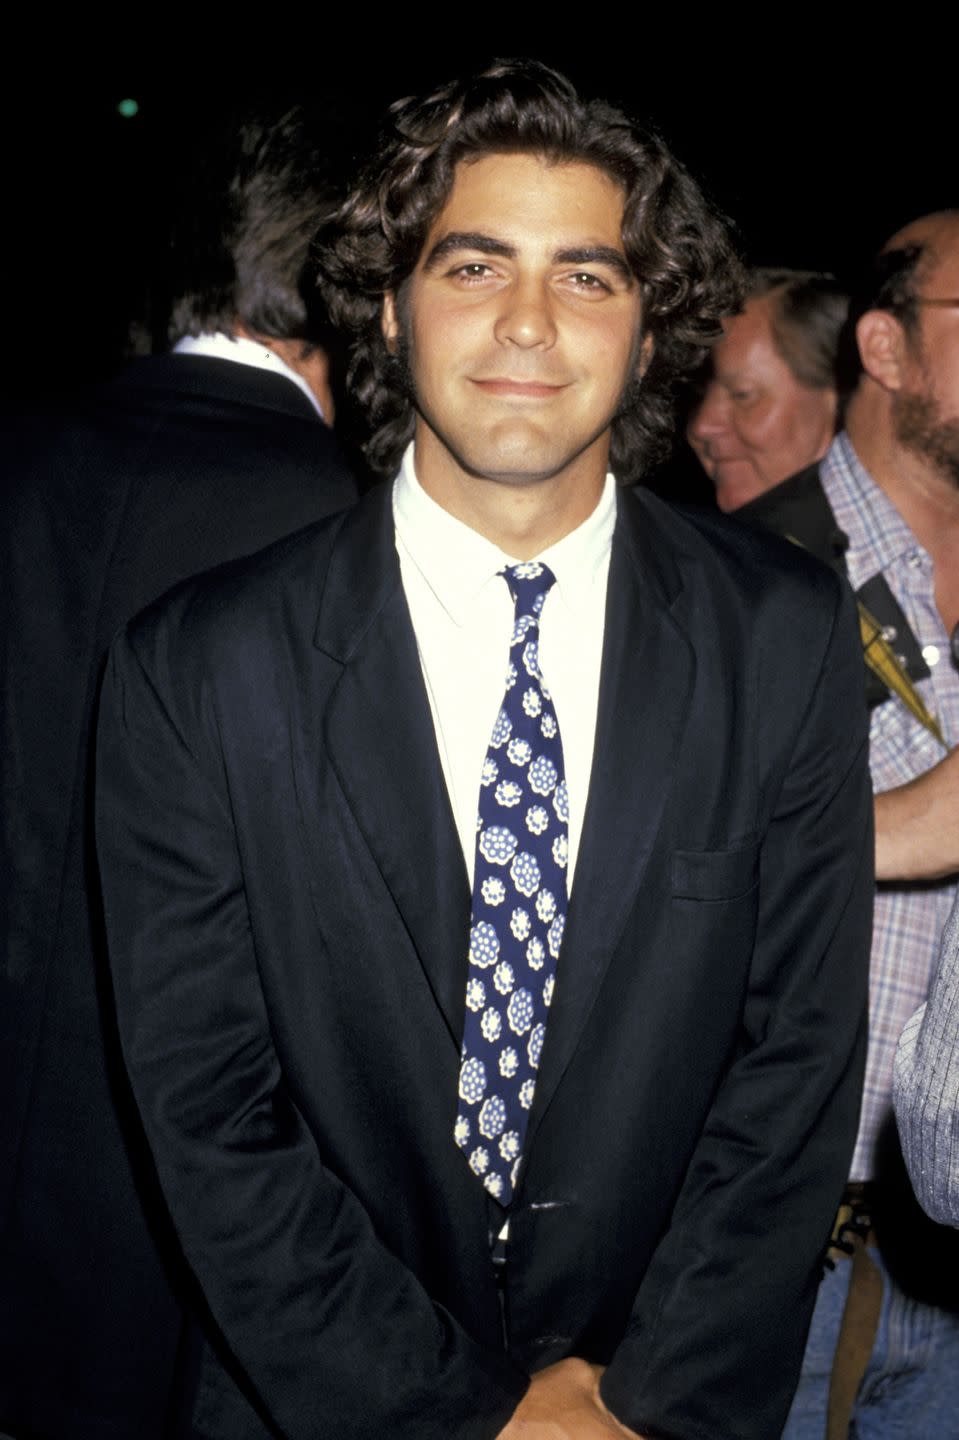 Then: George Clooney